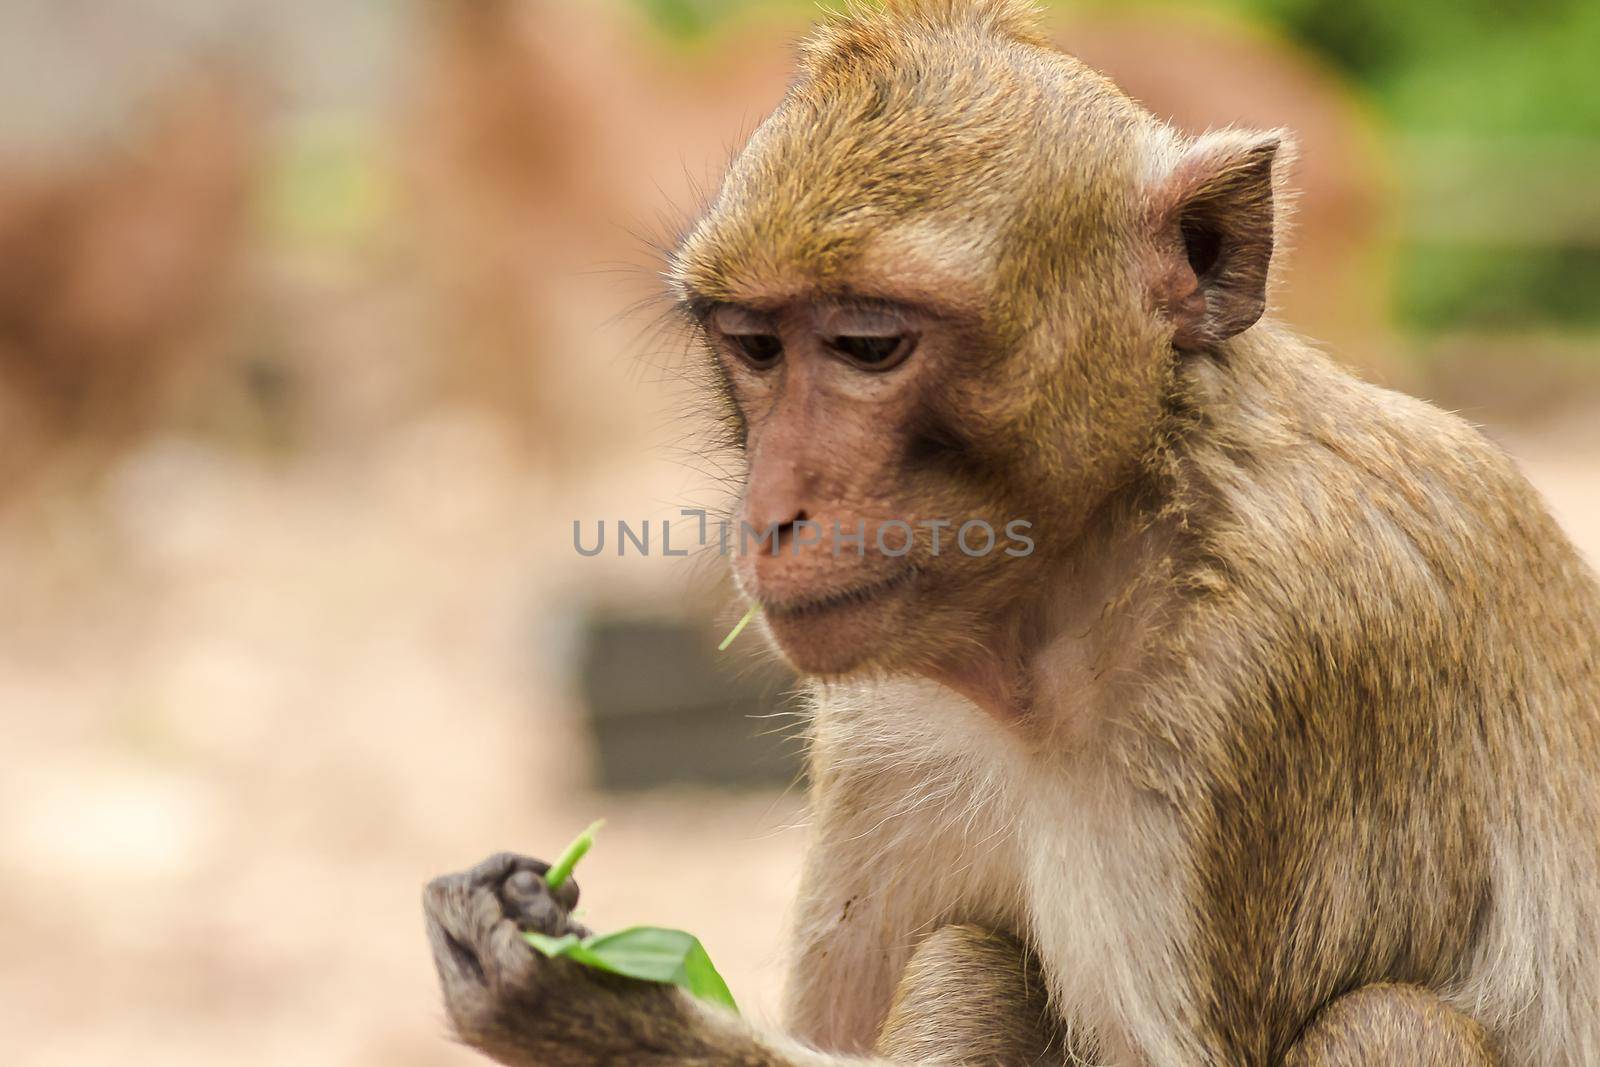 Crab-eating Macaque sat on the fence, eating the grass.
The macaque has brown hair on its body. The tail is longer than the length of the body. The hair in the middle of the head is pointed upright.